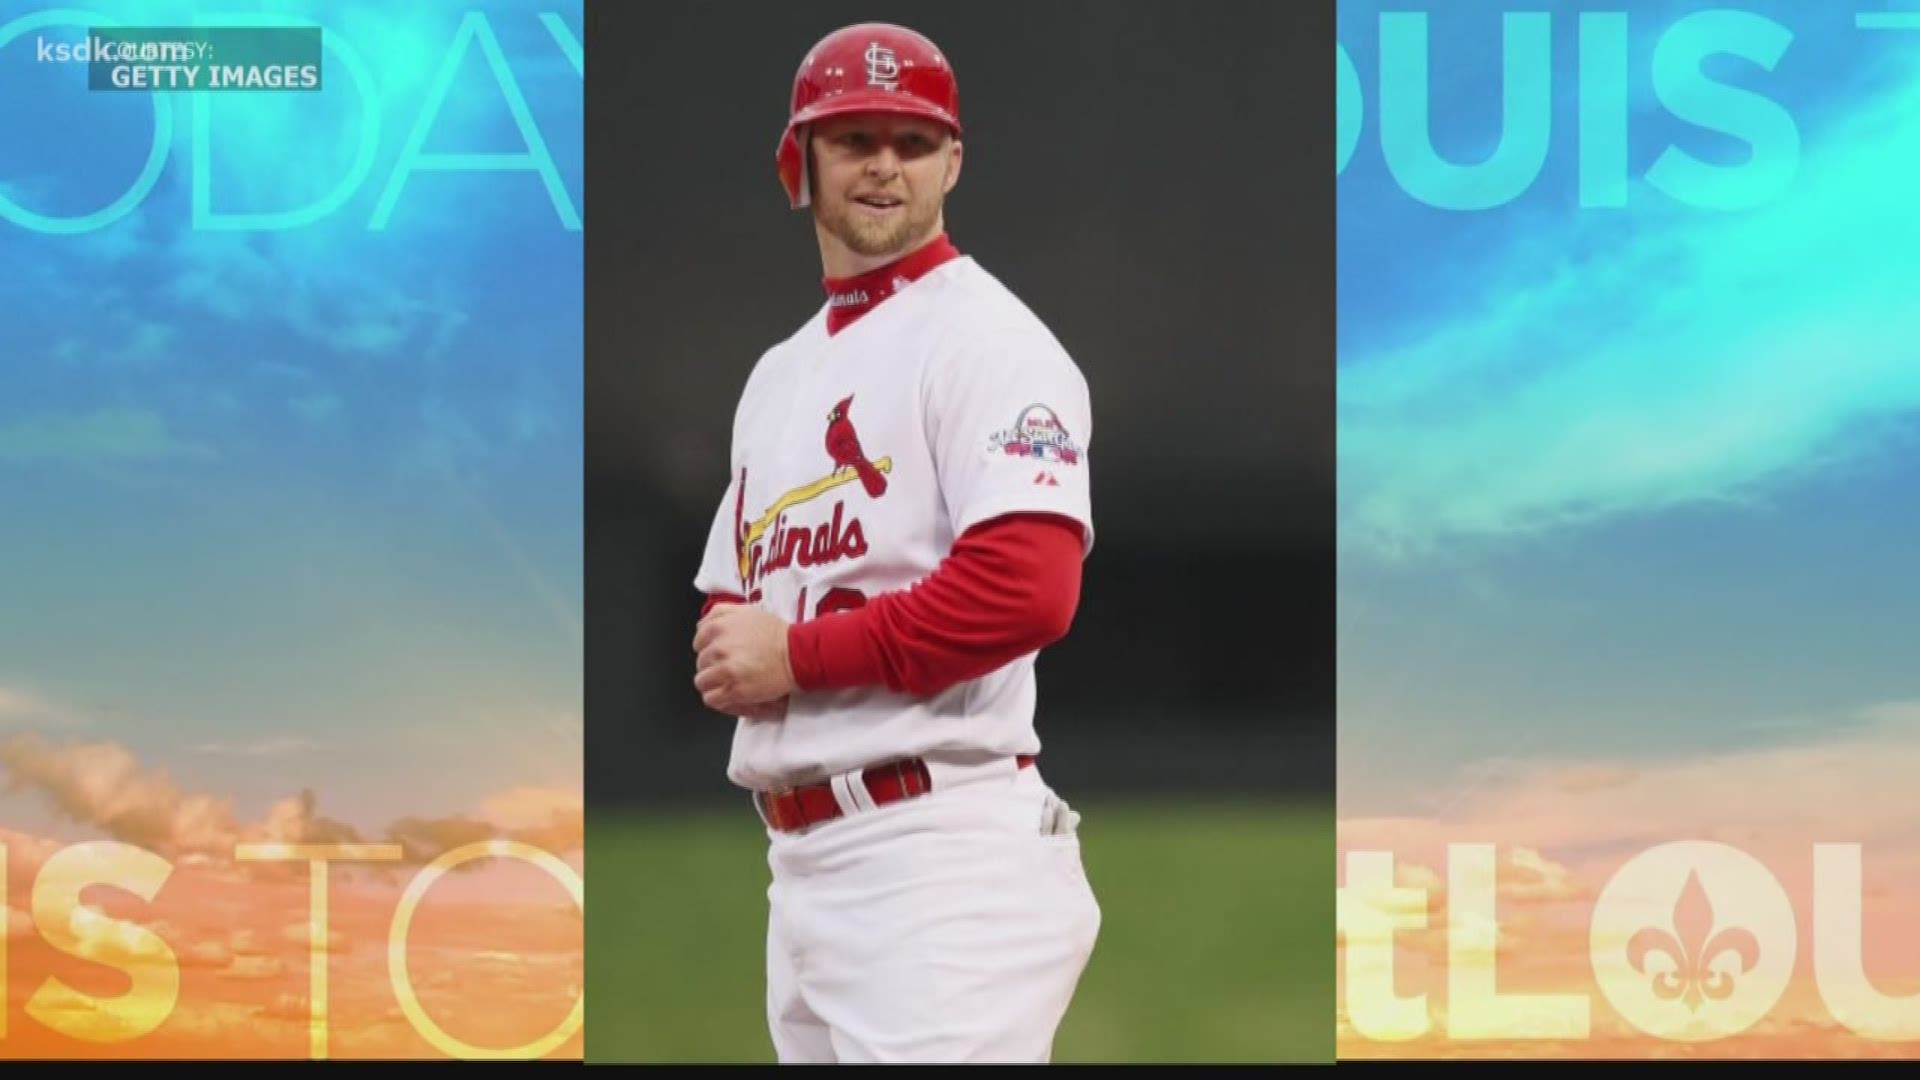 The St. Louis Cardinals are asking for thoughts and prayers for former outfielder and World Series champion Chris Duncan. He’s stepping away from his radio job at 101 ESPN to focus on fighting his cancer.